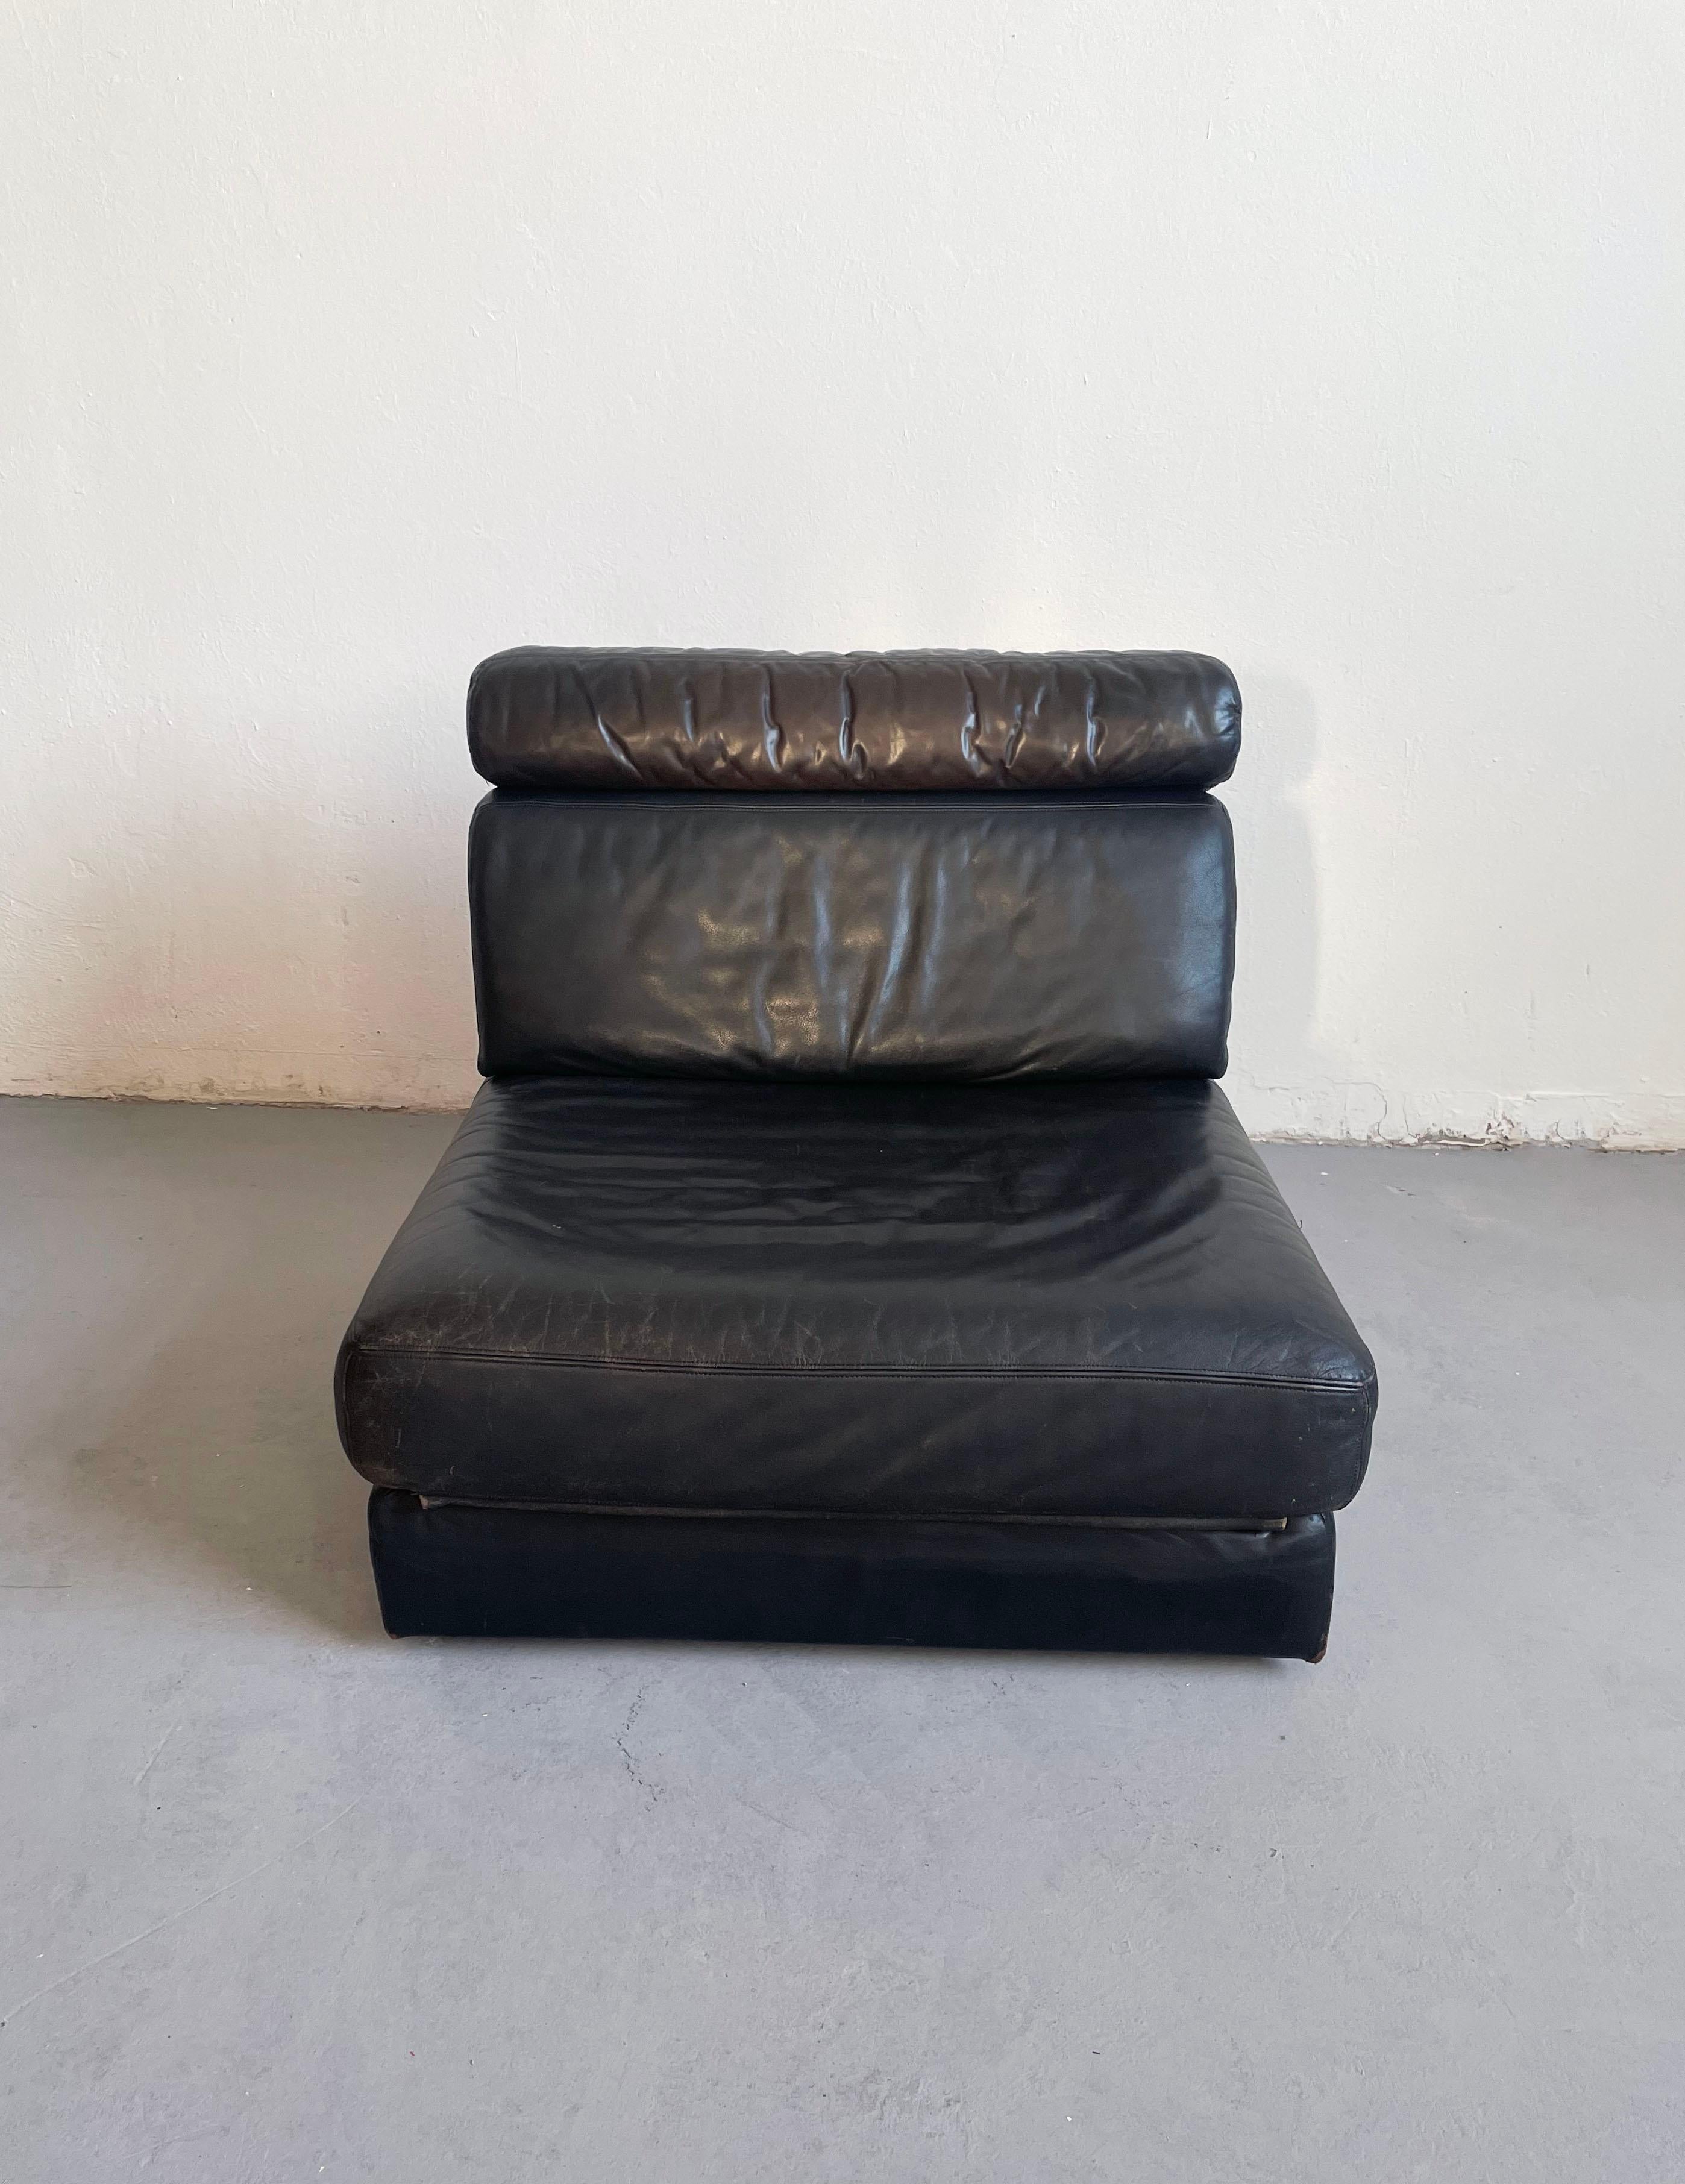 Vintage De Sede lounge chair/ armless seating module of the sofa model 'DS-77', leather, fabric, Switzerland, the 1970s.

The chair can be easily converted into a very comfortable single-person bed.

The item offered for sale is in very good